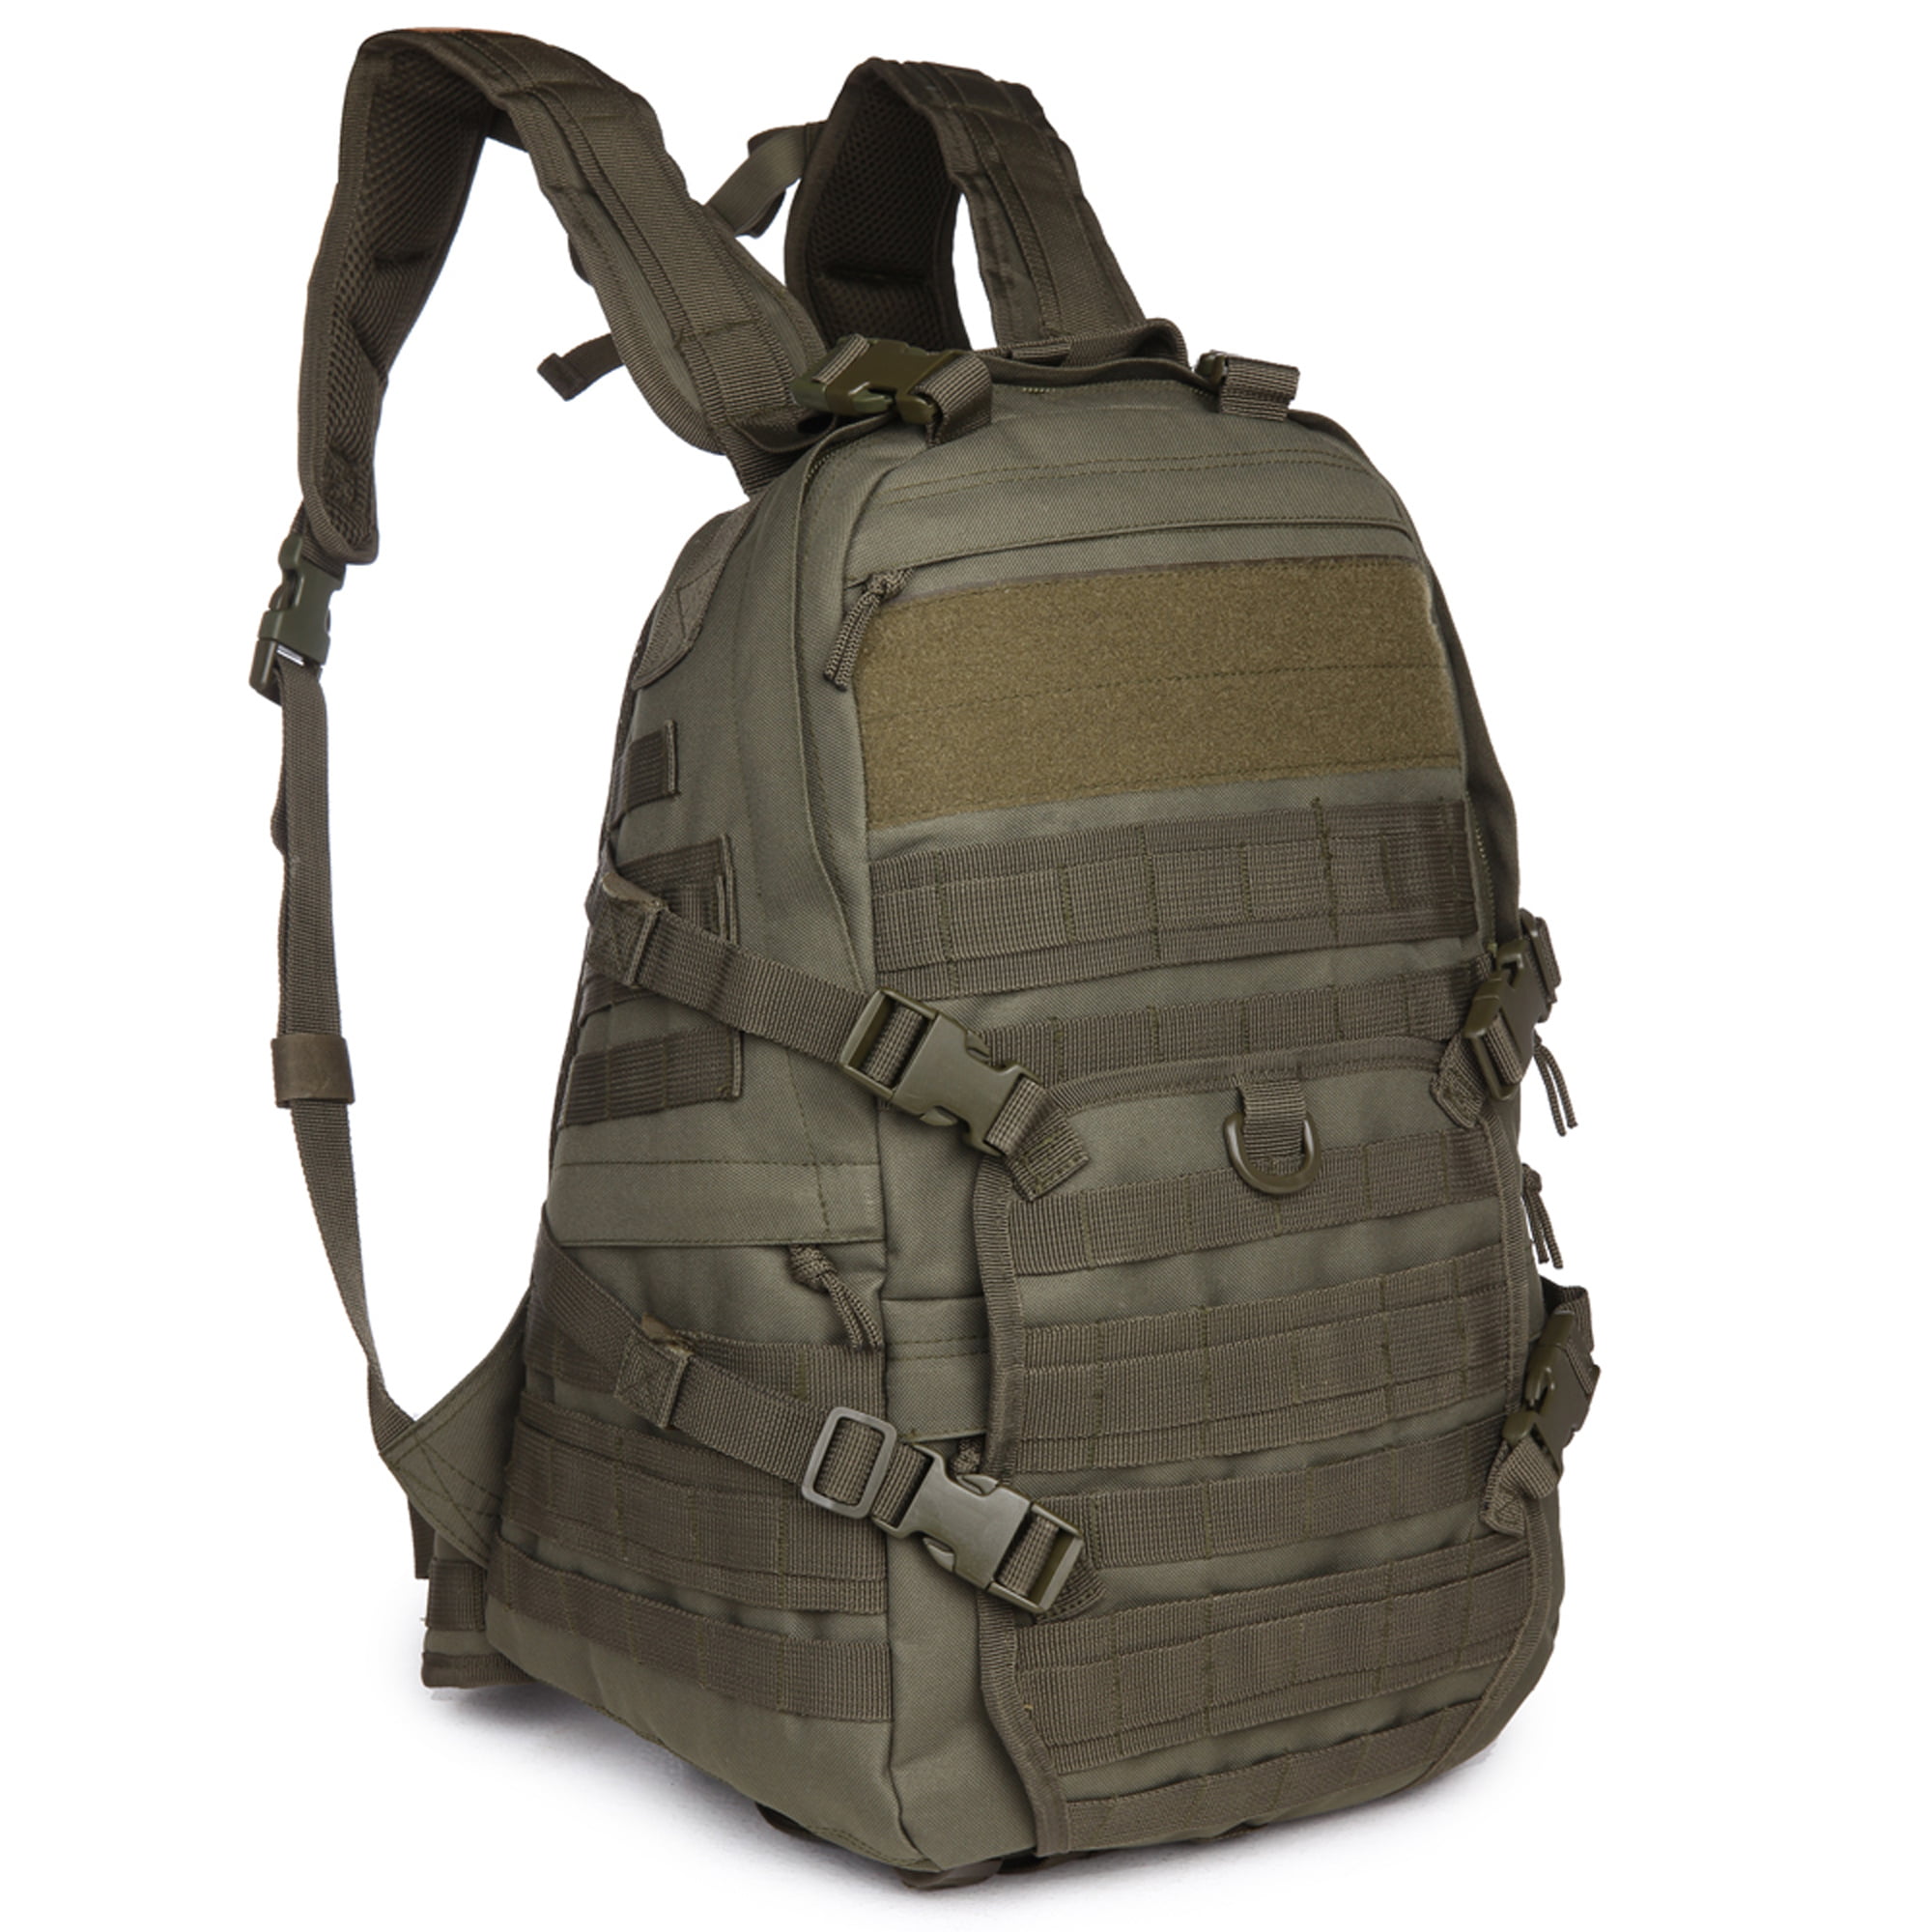 Outdoor Military Tactical Molle Patrol Backpack Sport Camping Hiking Trekking